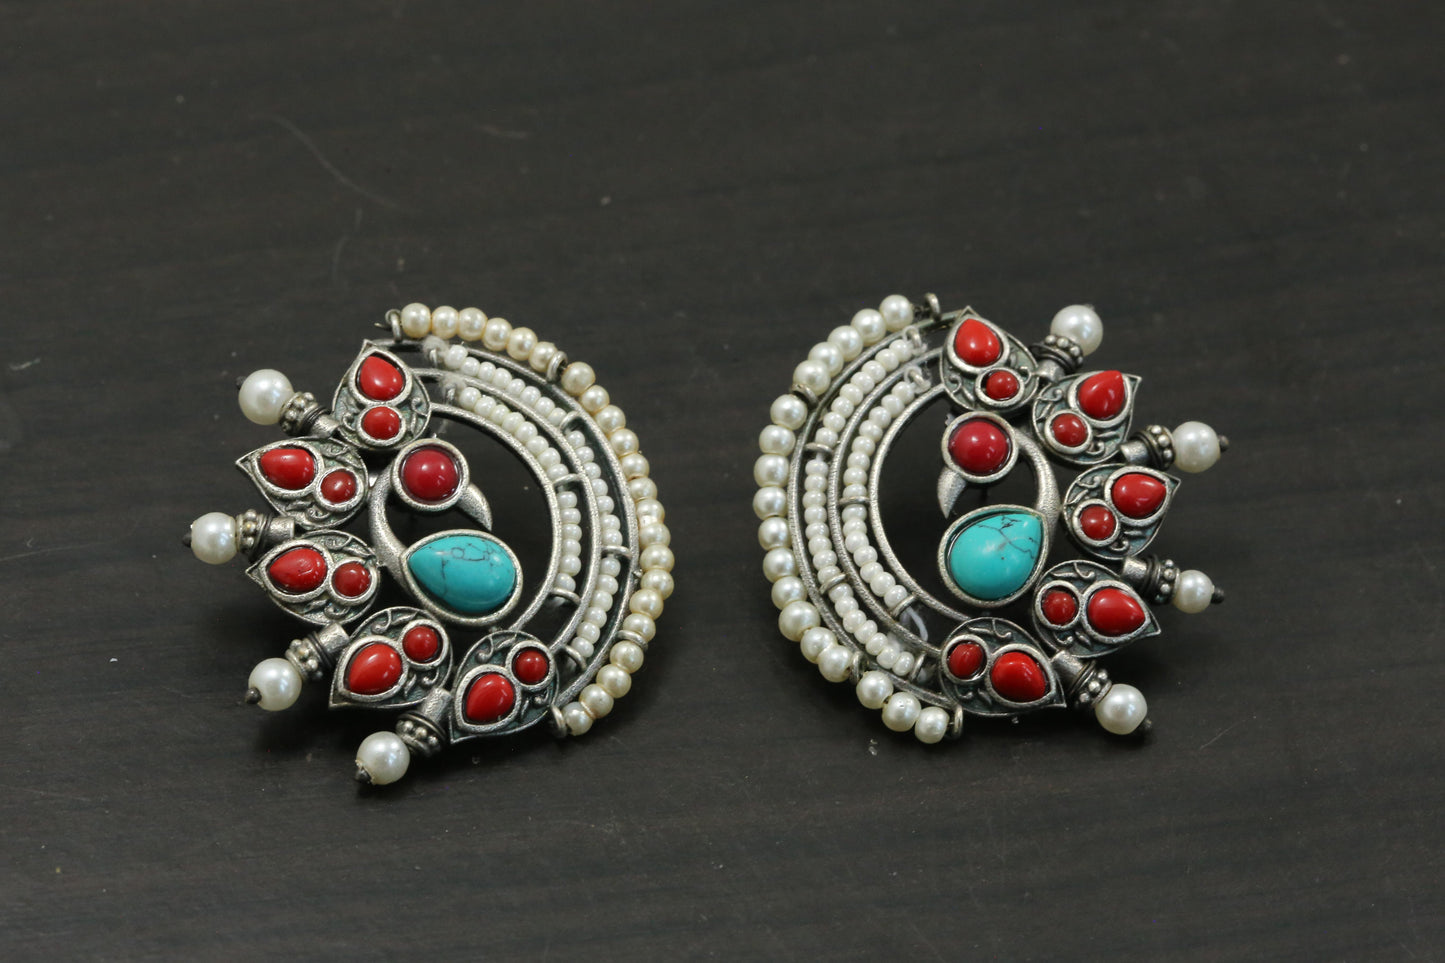 Silver Look Alike Studs - Turquoise Coral